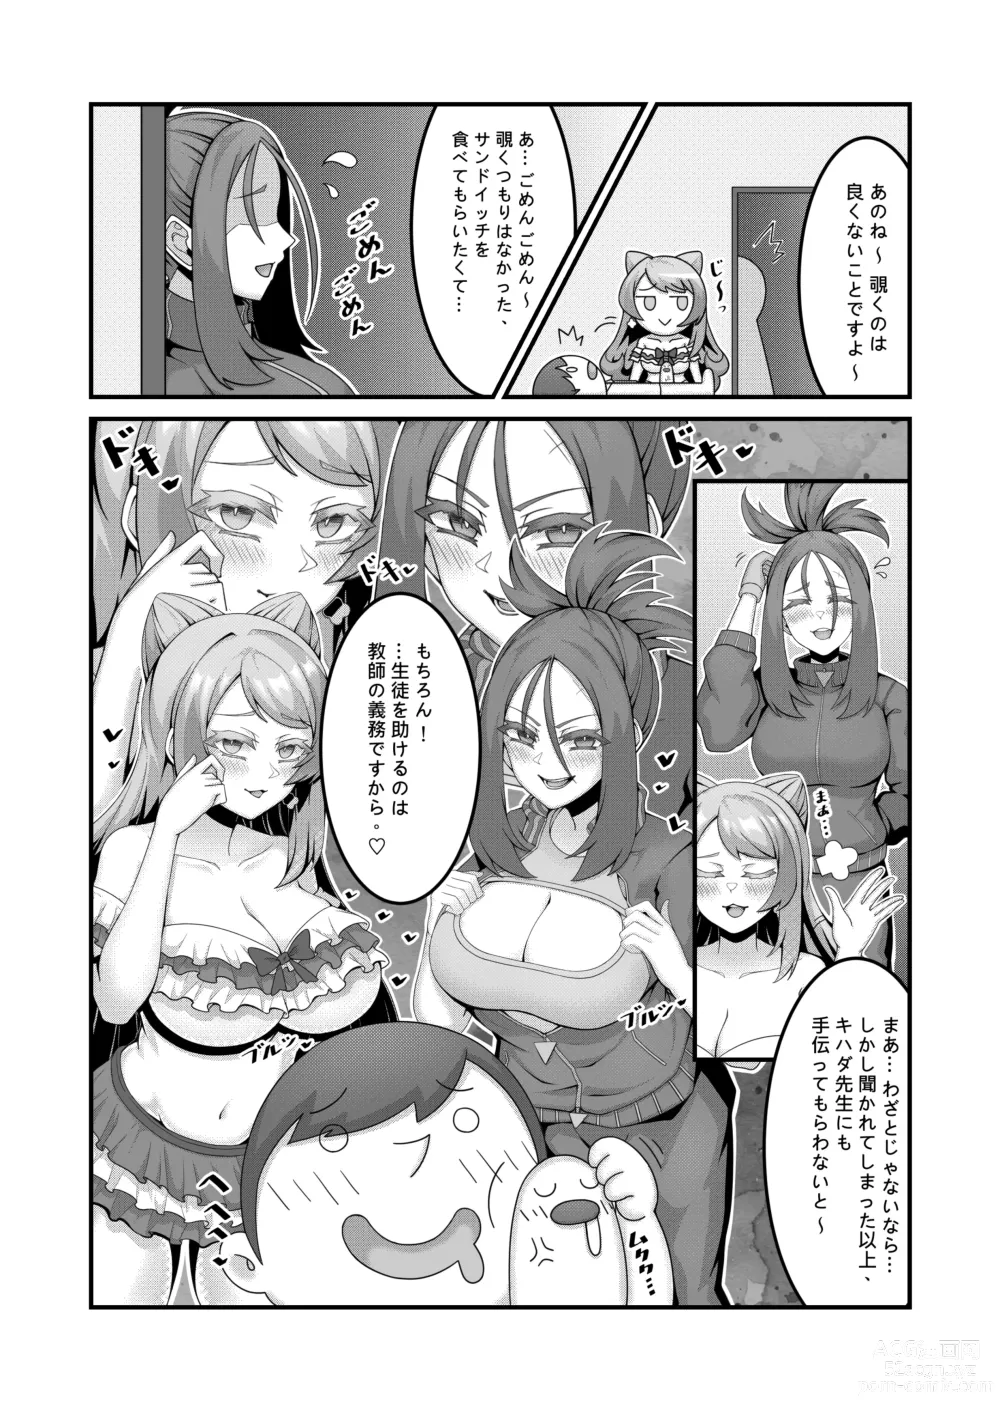 Page 7 of doujinshi Sex after Versus？ - ミモザ & キハダ